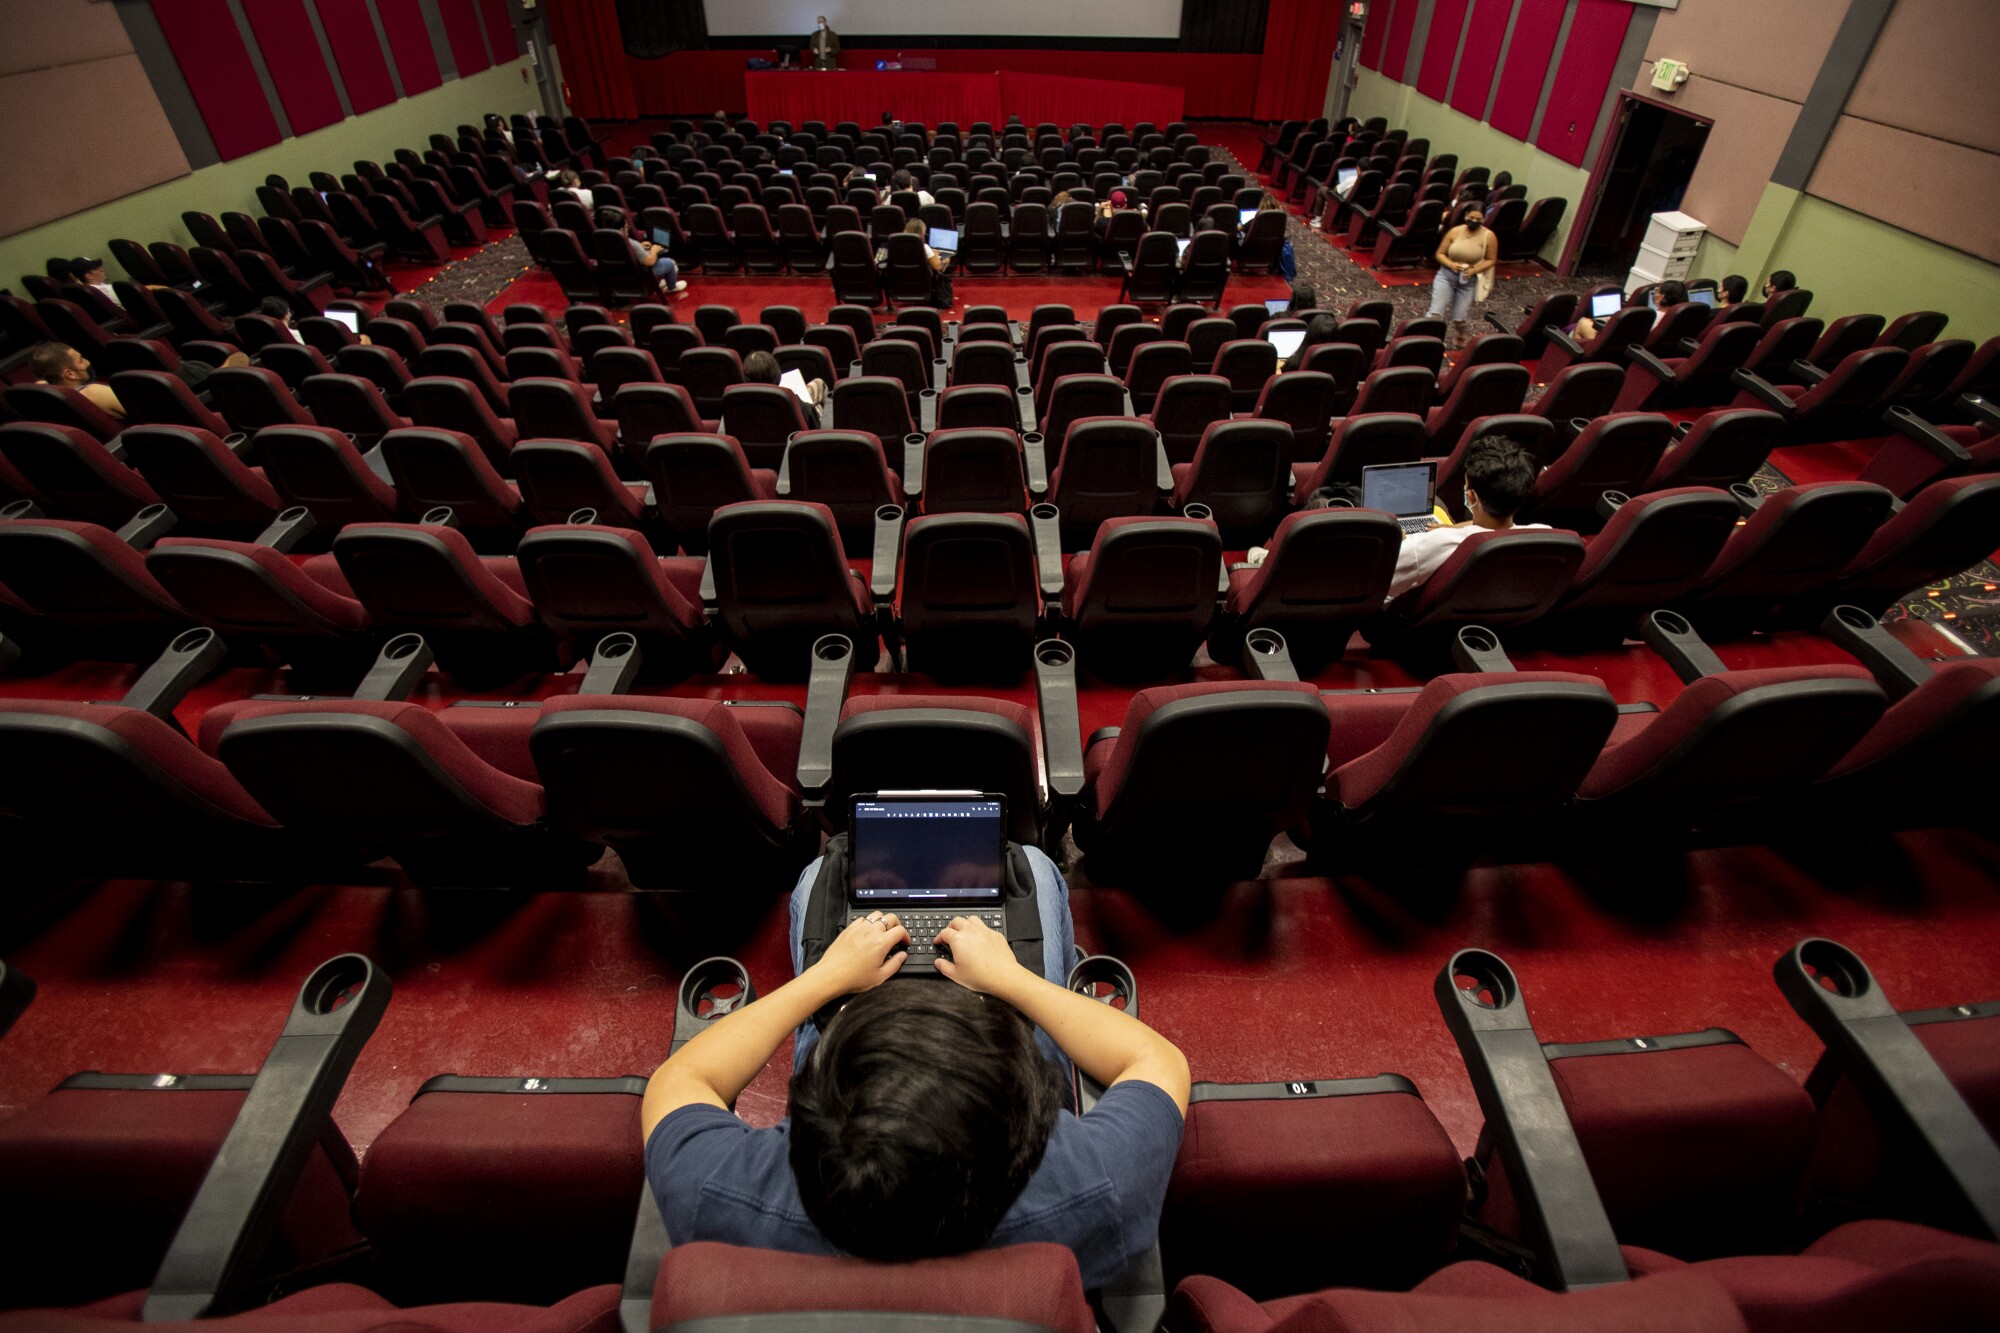 College students attend a class inside a movie theater